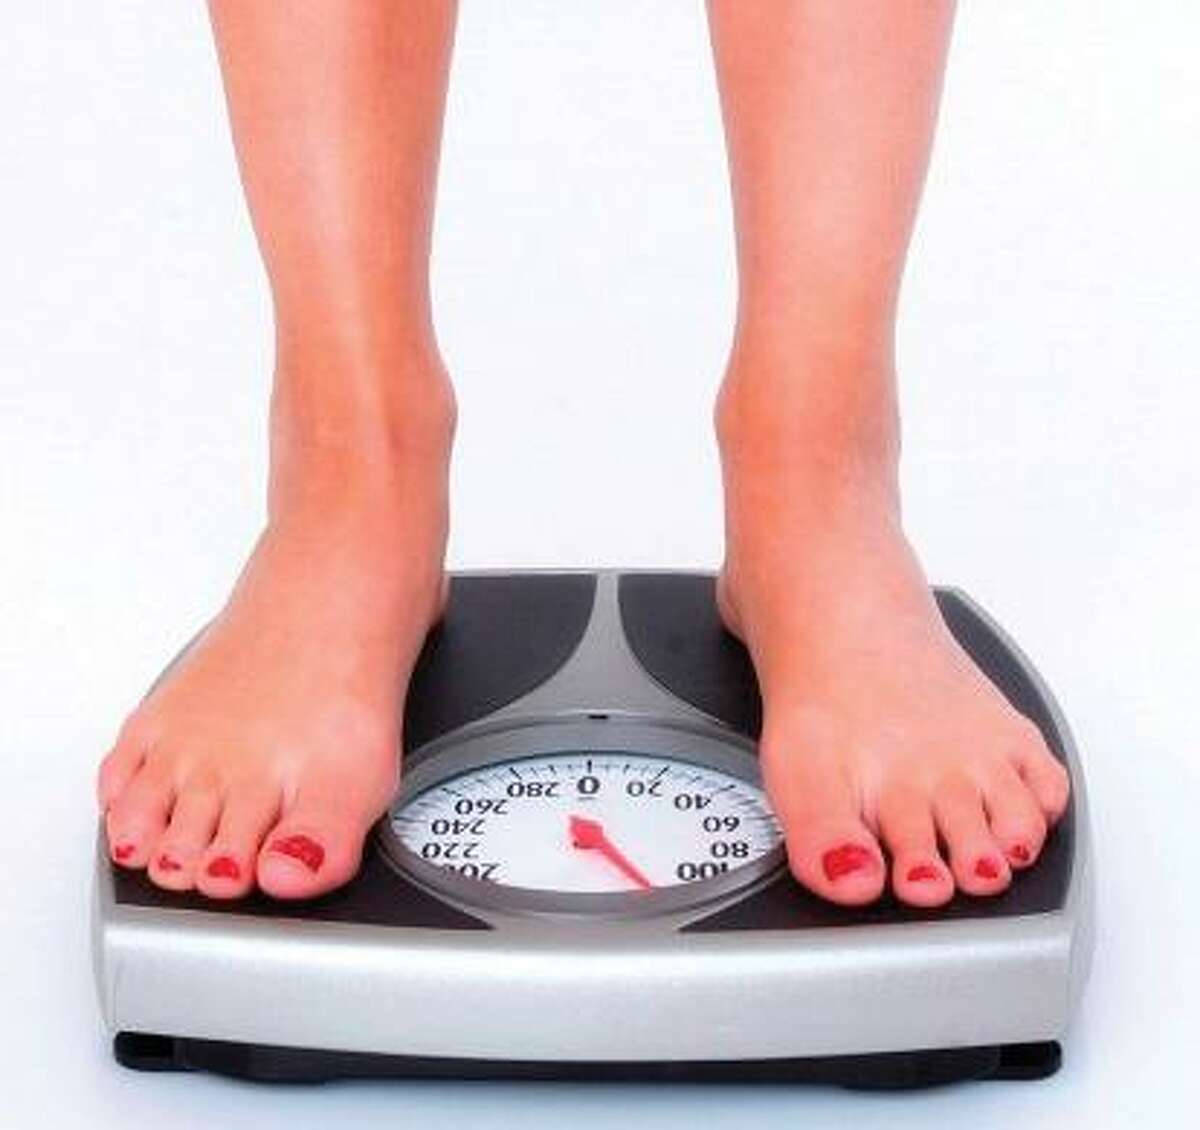 feet on a scale / weight / obesity / illustration